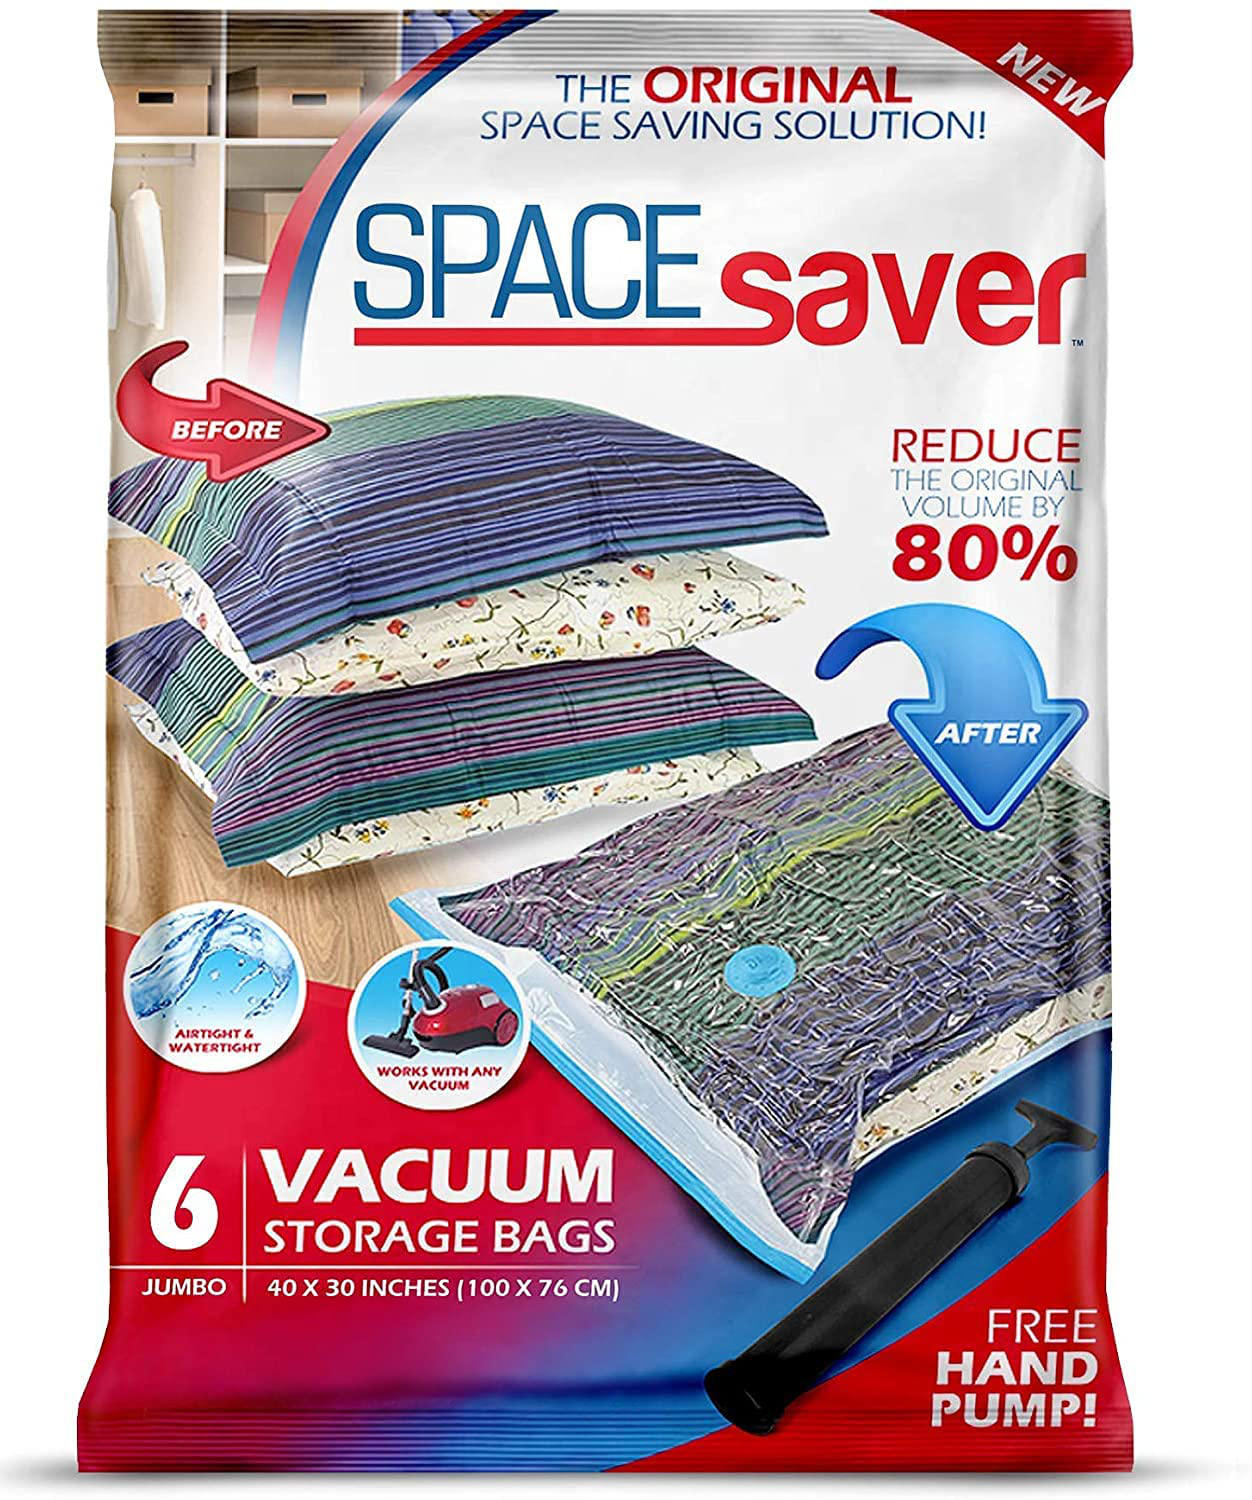 Spacesaver Premium Vacuum Storage Bags. 80% More Storage! Hand-Pump for Travel! Double-Zip Seal and Triple Seal Turbo-Valve for Max Space Saving! (Jumbo 6 Pack)